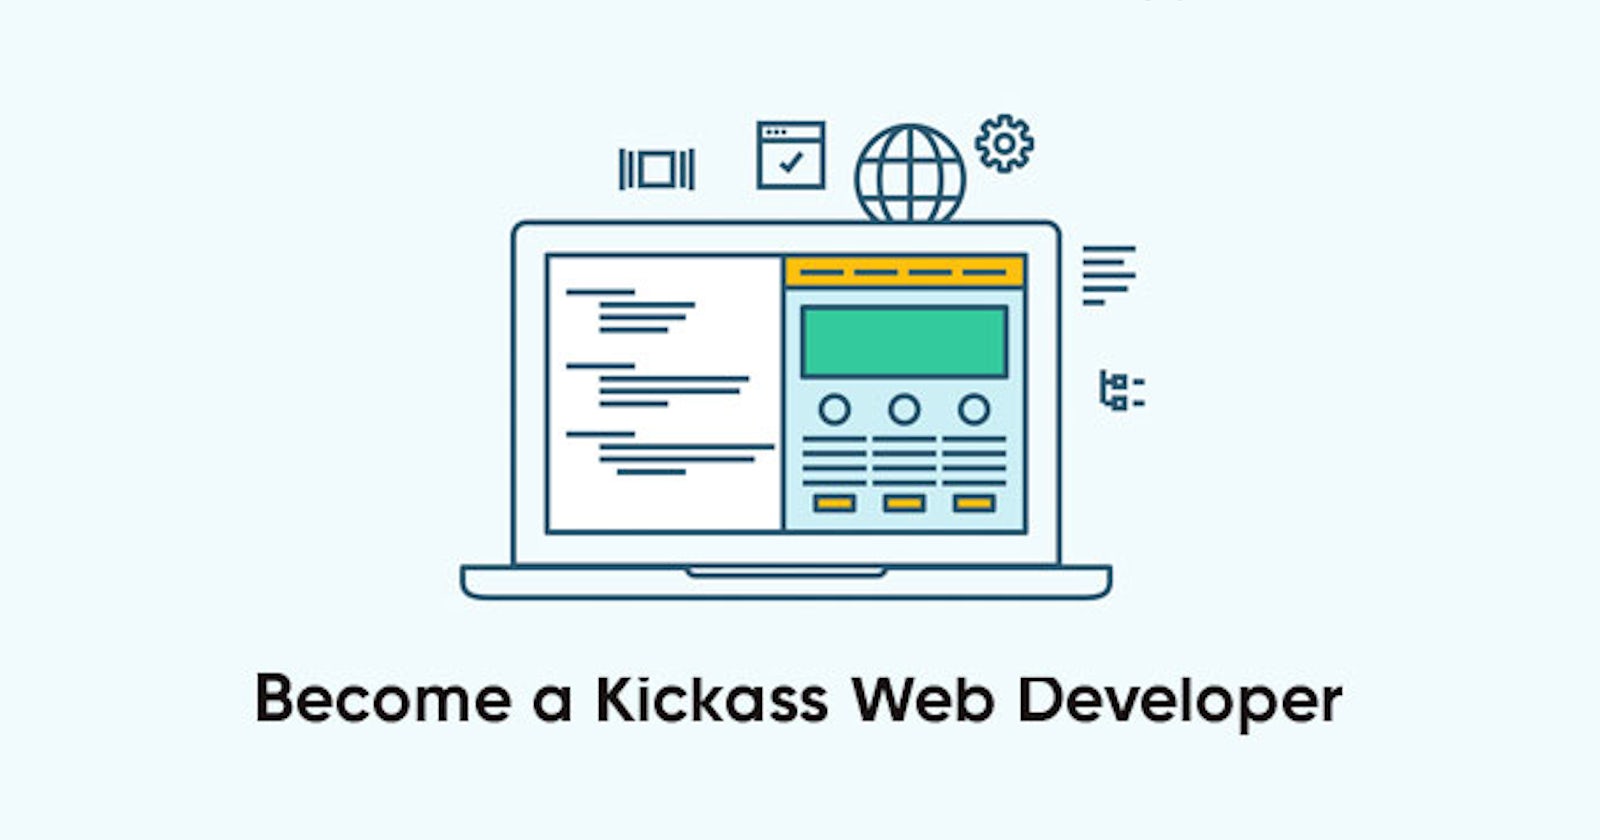 How to become a Kickass Web Developer in 2021